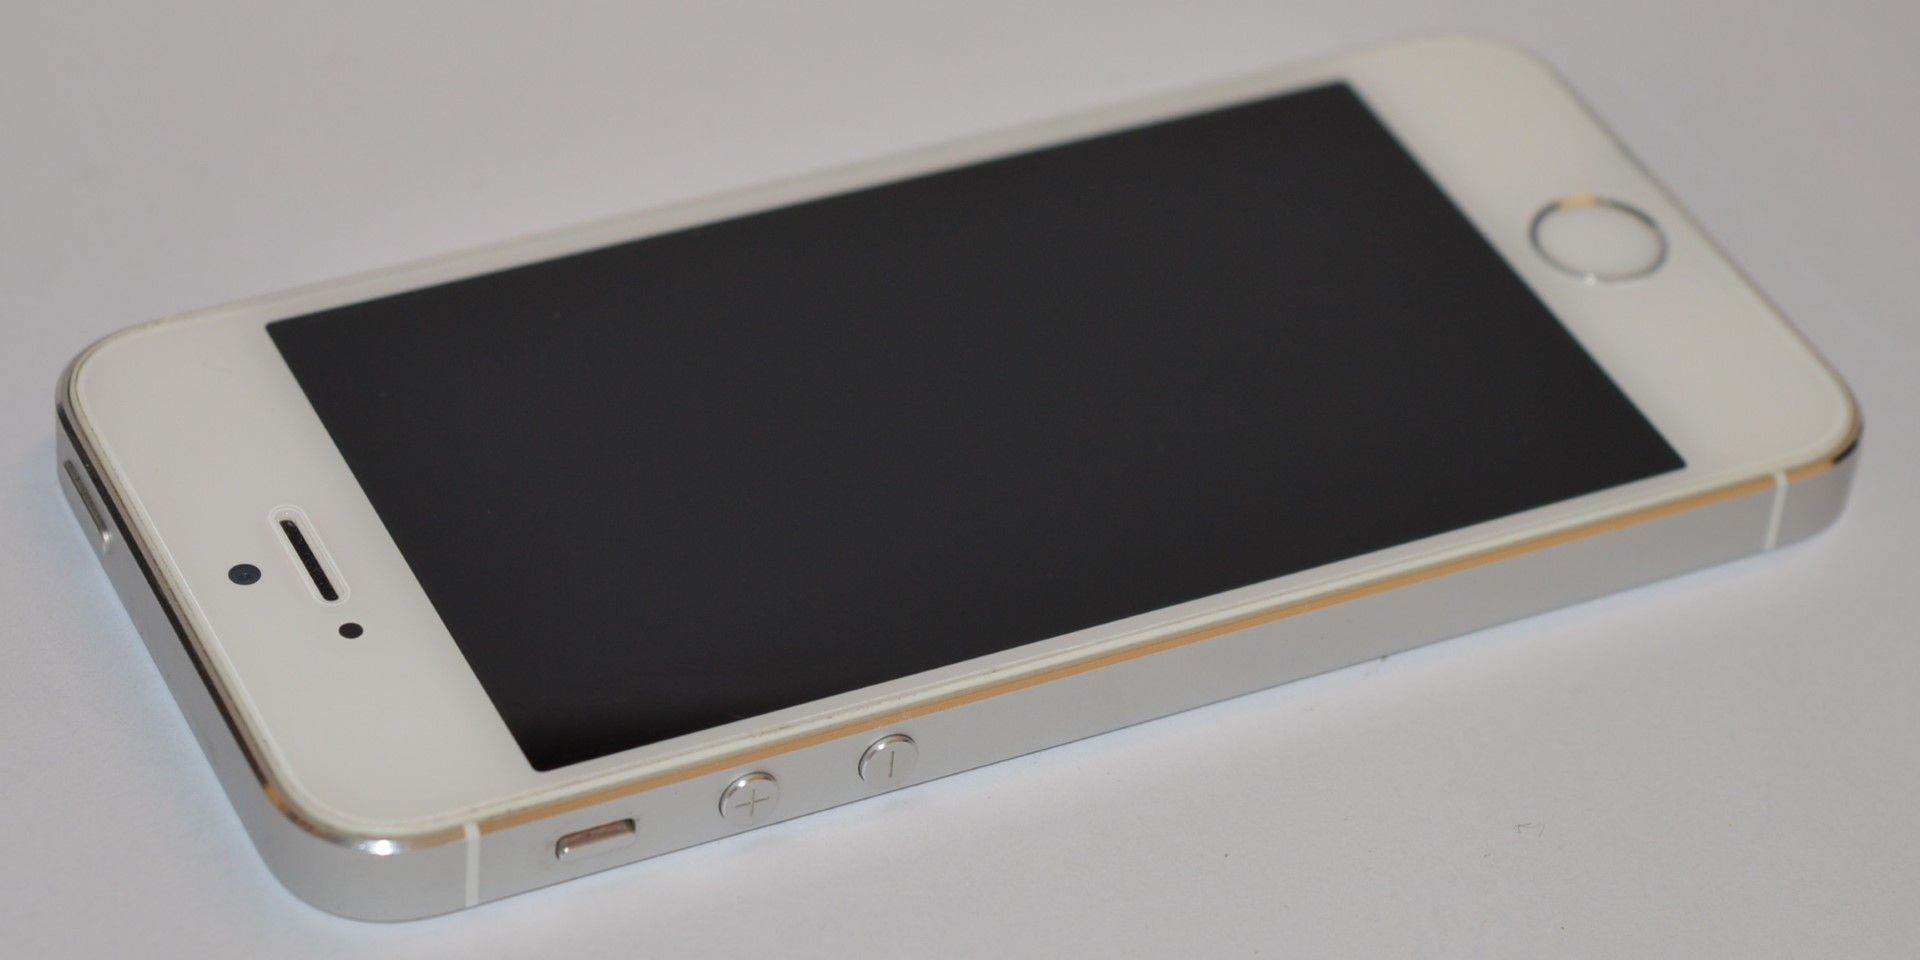 1 x Apple Iphone 5S White 32gb Mobile Phone - Model A1457 - Excellent Cosmetic Condition - Good - Image 7 of 15